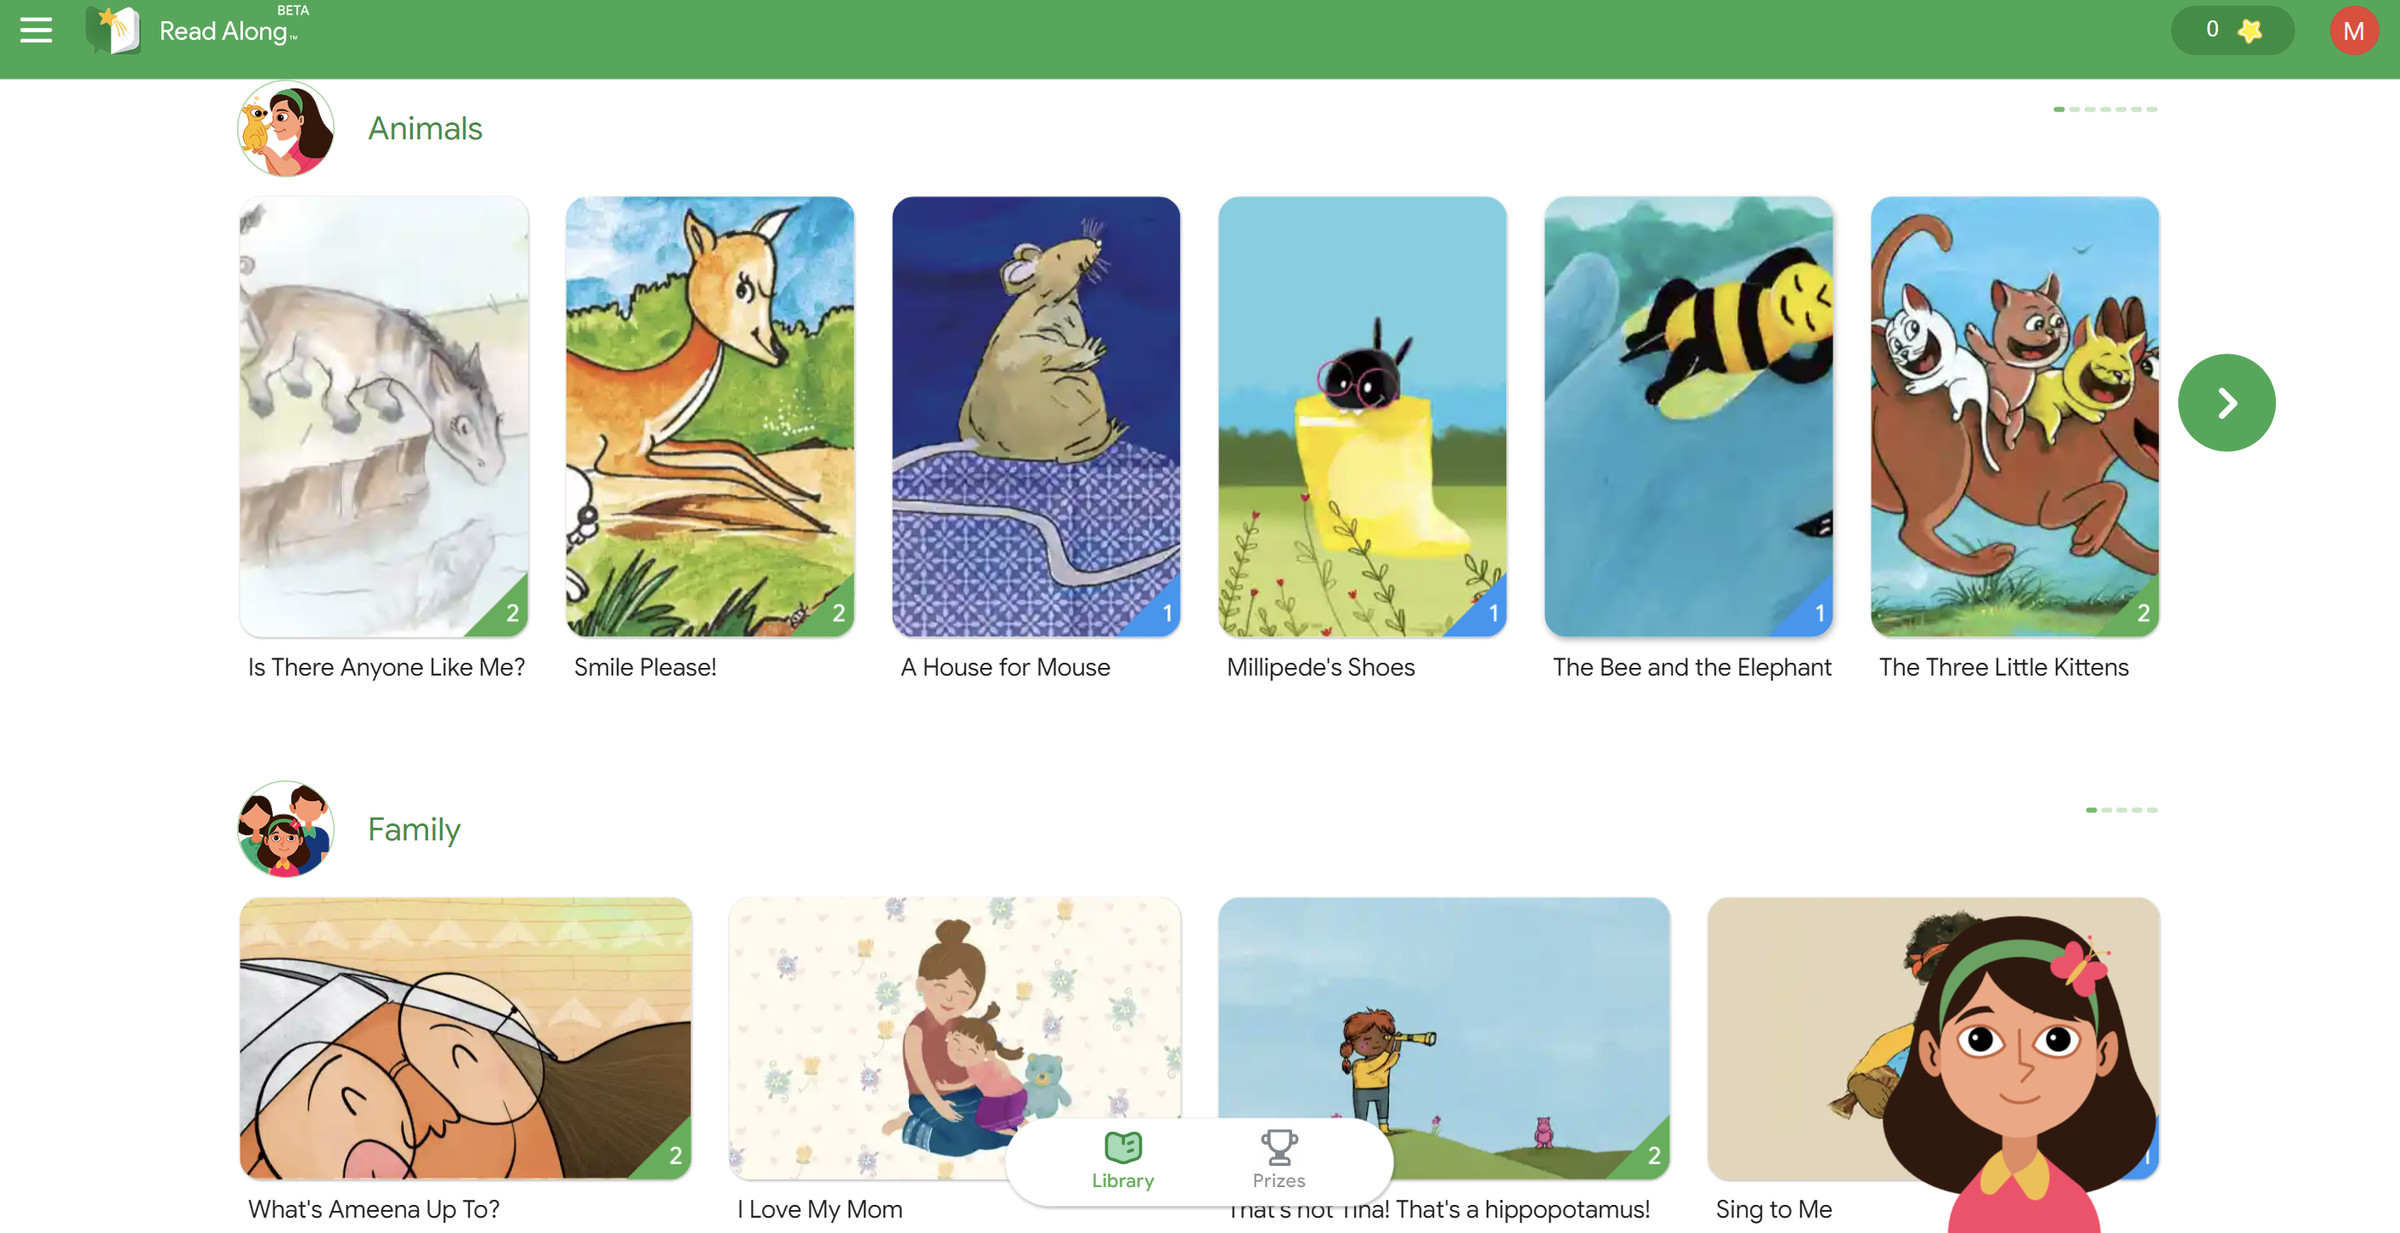 A screenshot of Read Along showing a row of Animals stories and a row of Families stories.